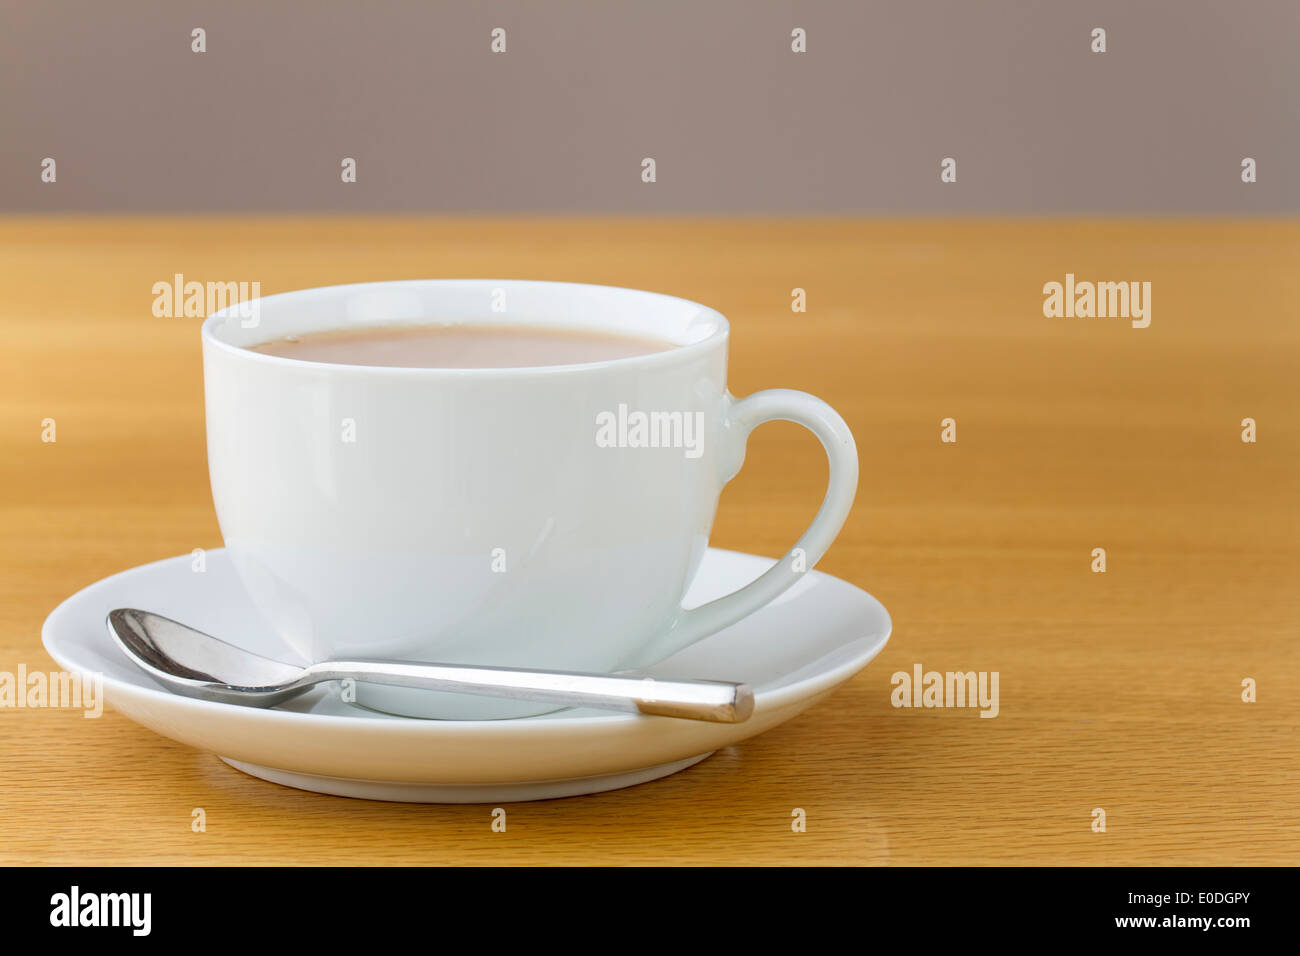 Cup of tea on a wooden table Stock Photo